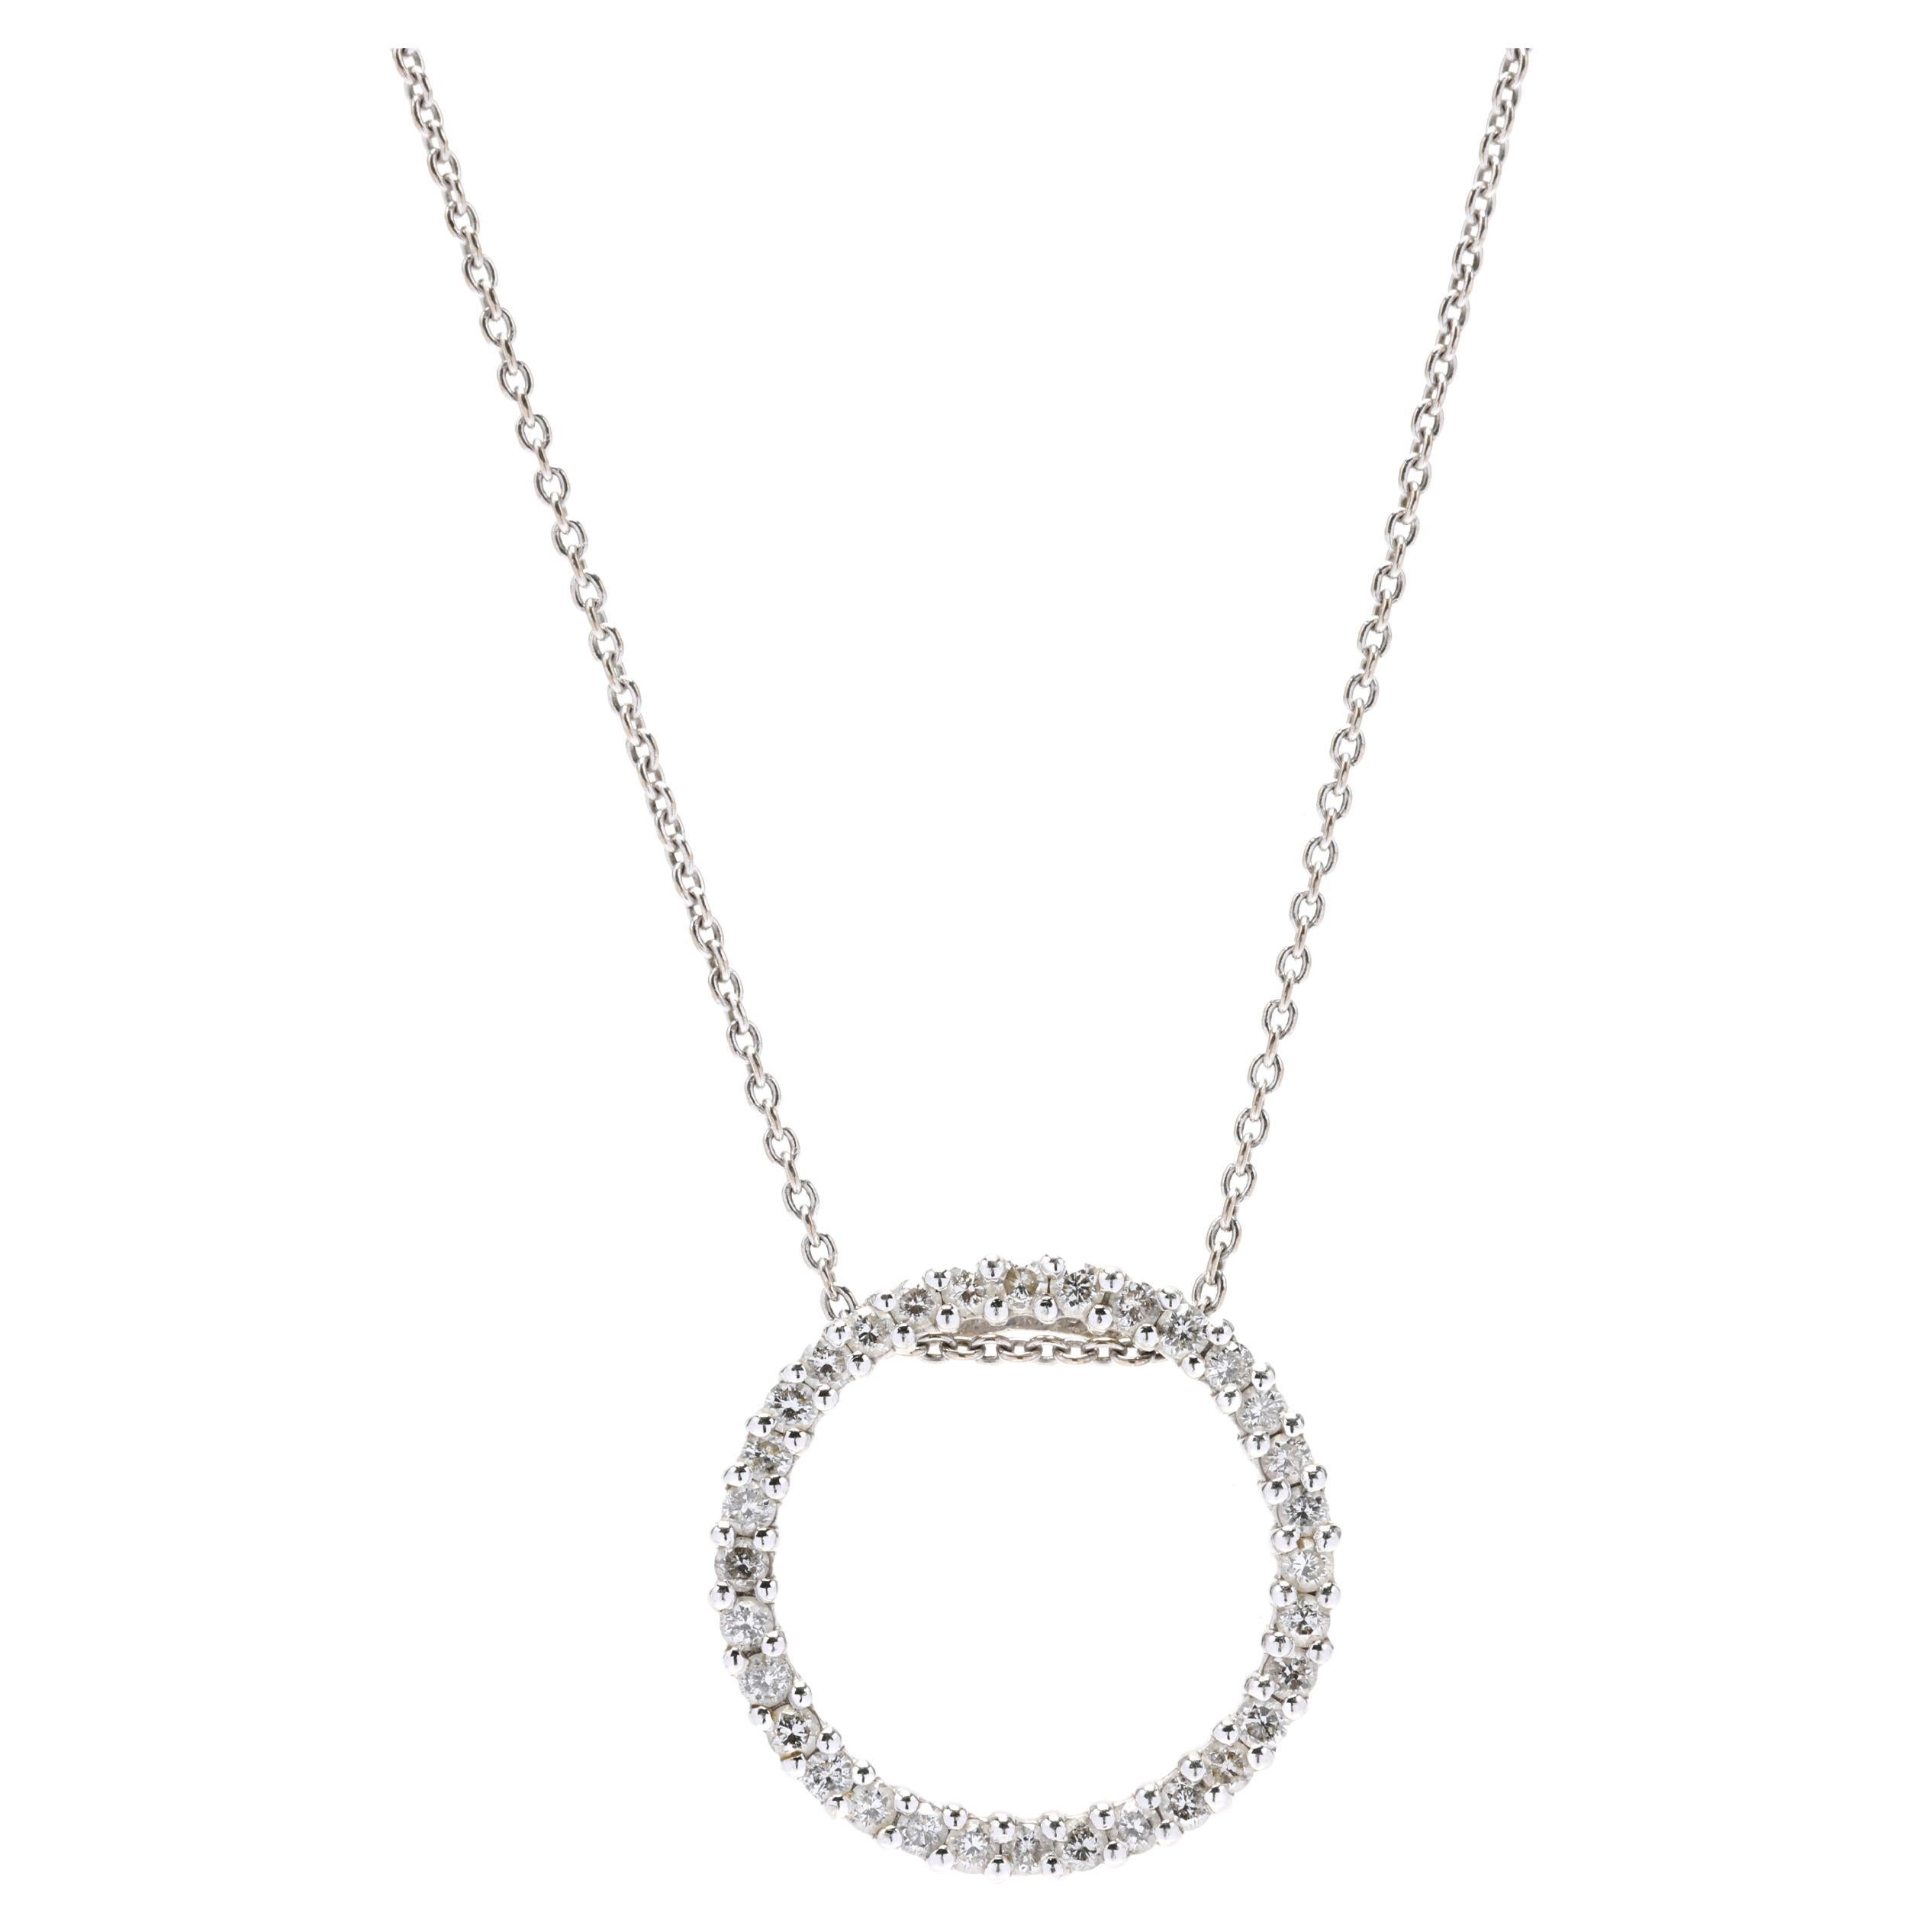 1cwt Diamond Circle Pendant Necklace, 14k White Gold, Length 20 Inches For Sale